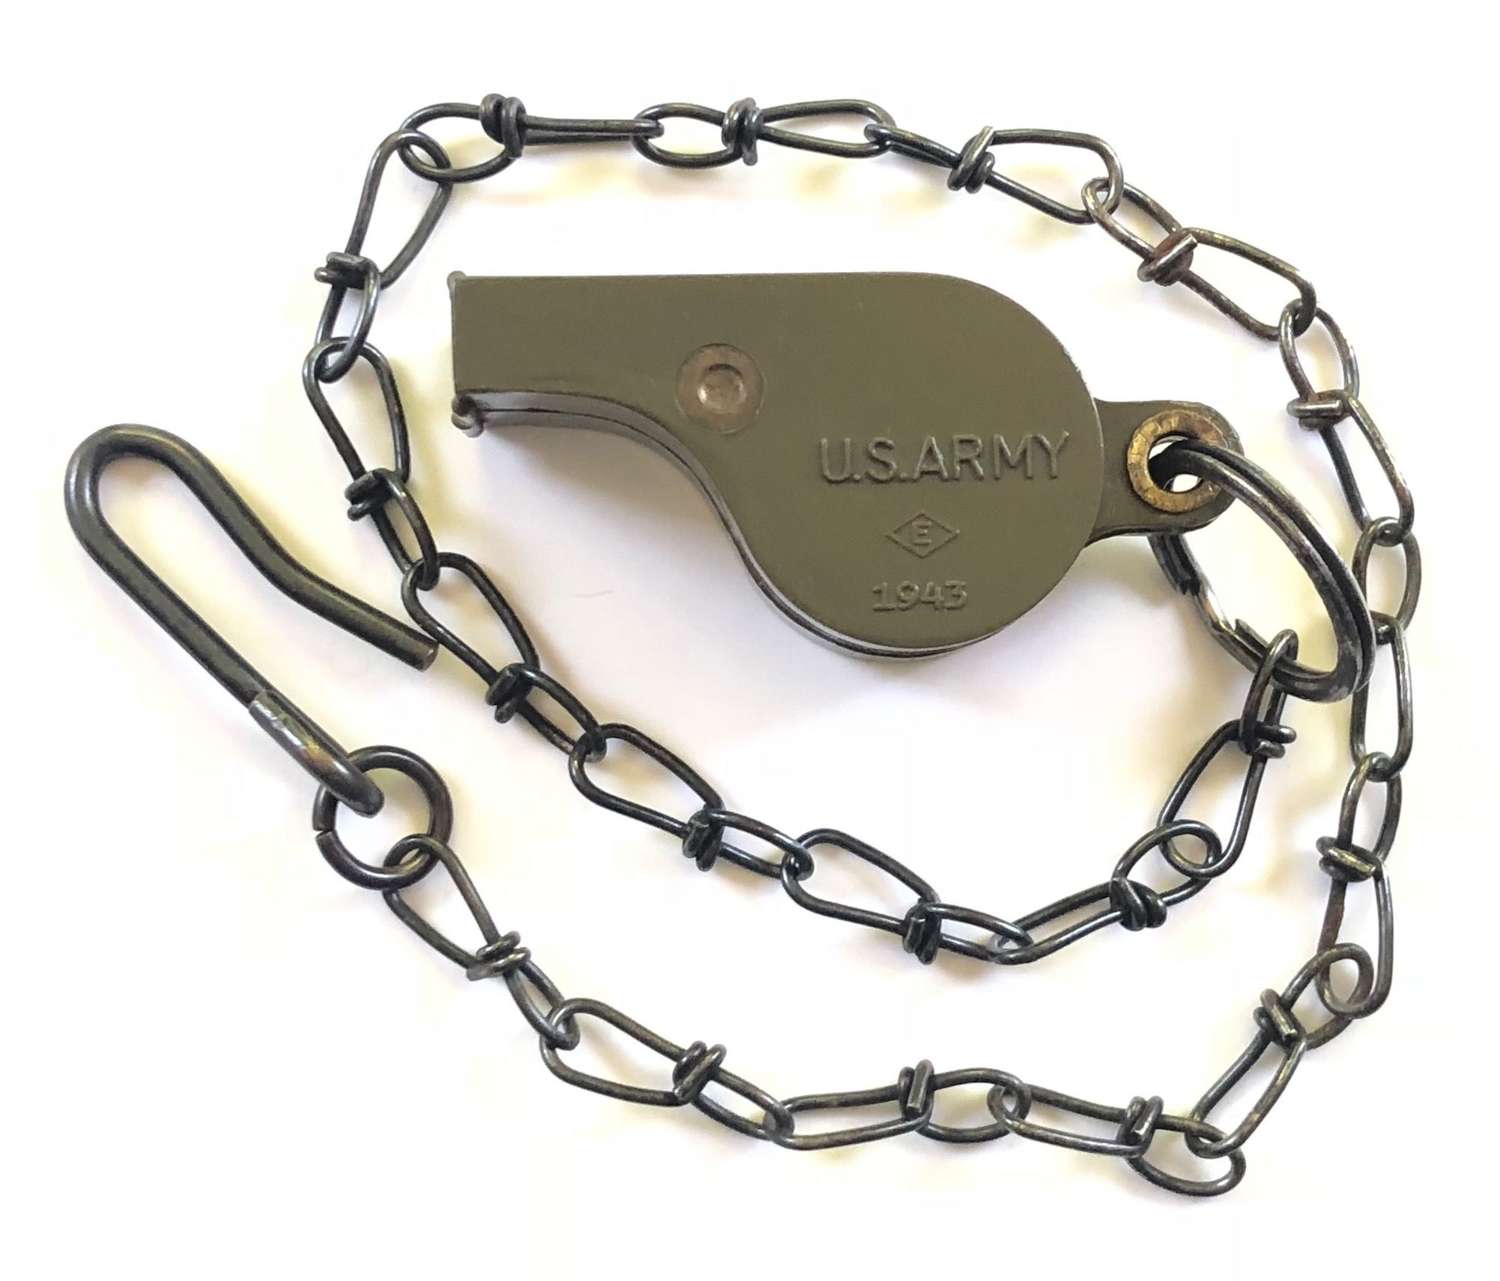 ww2-1943-us-army-issue-whistle-chain-_19480_pic2_size3.jpg